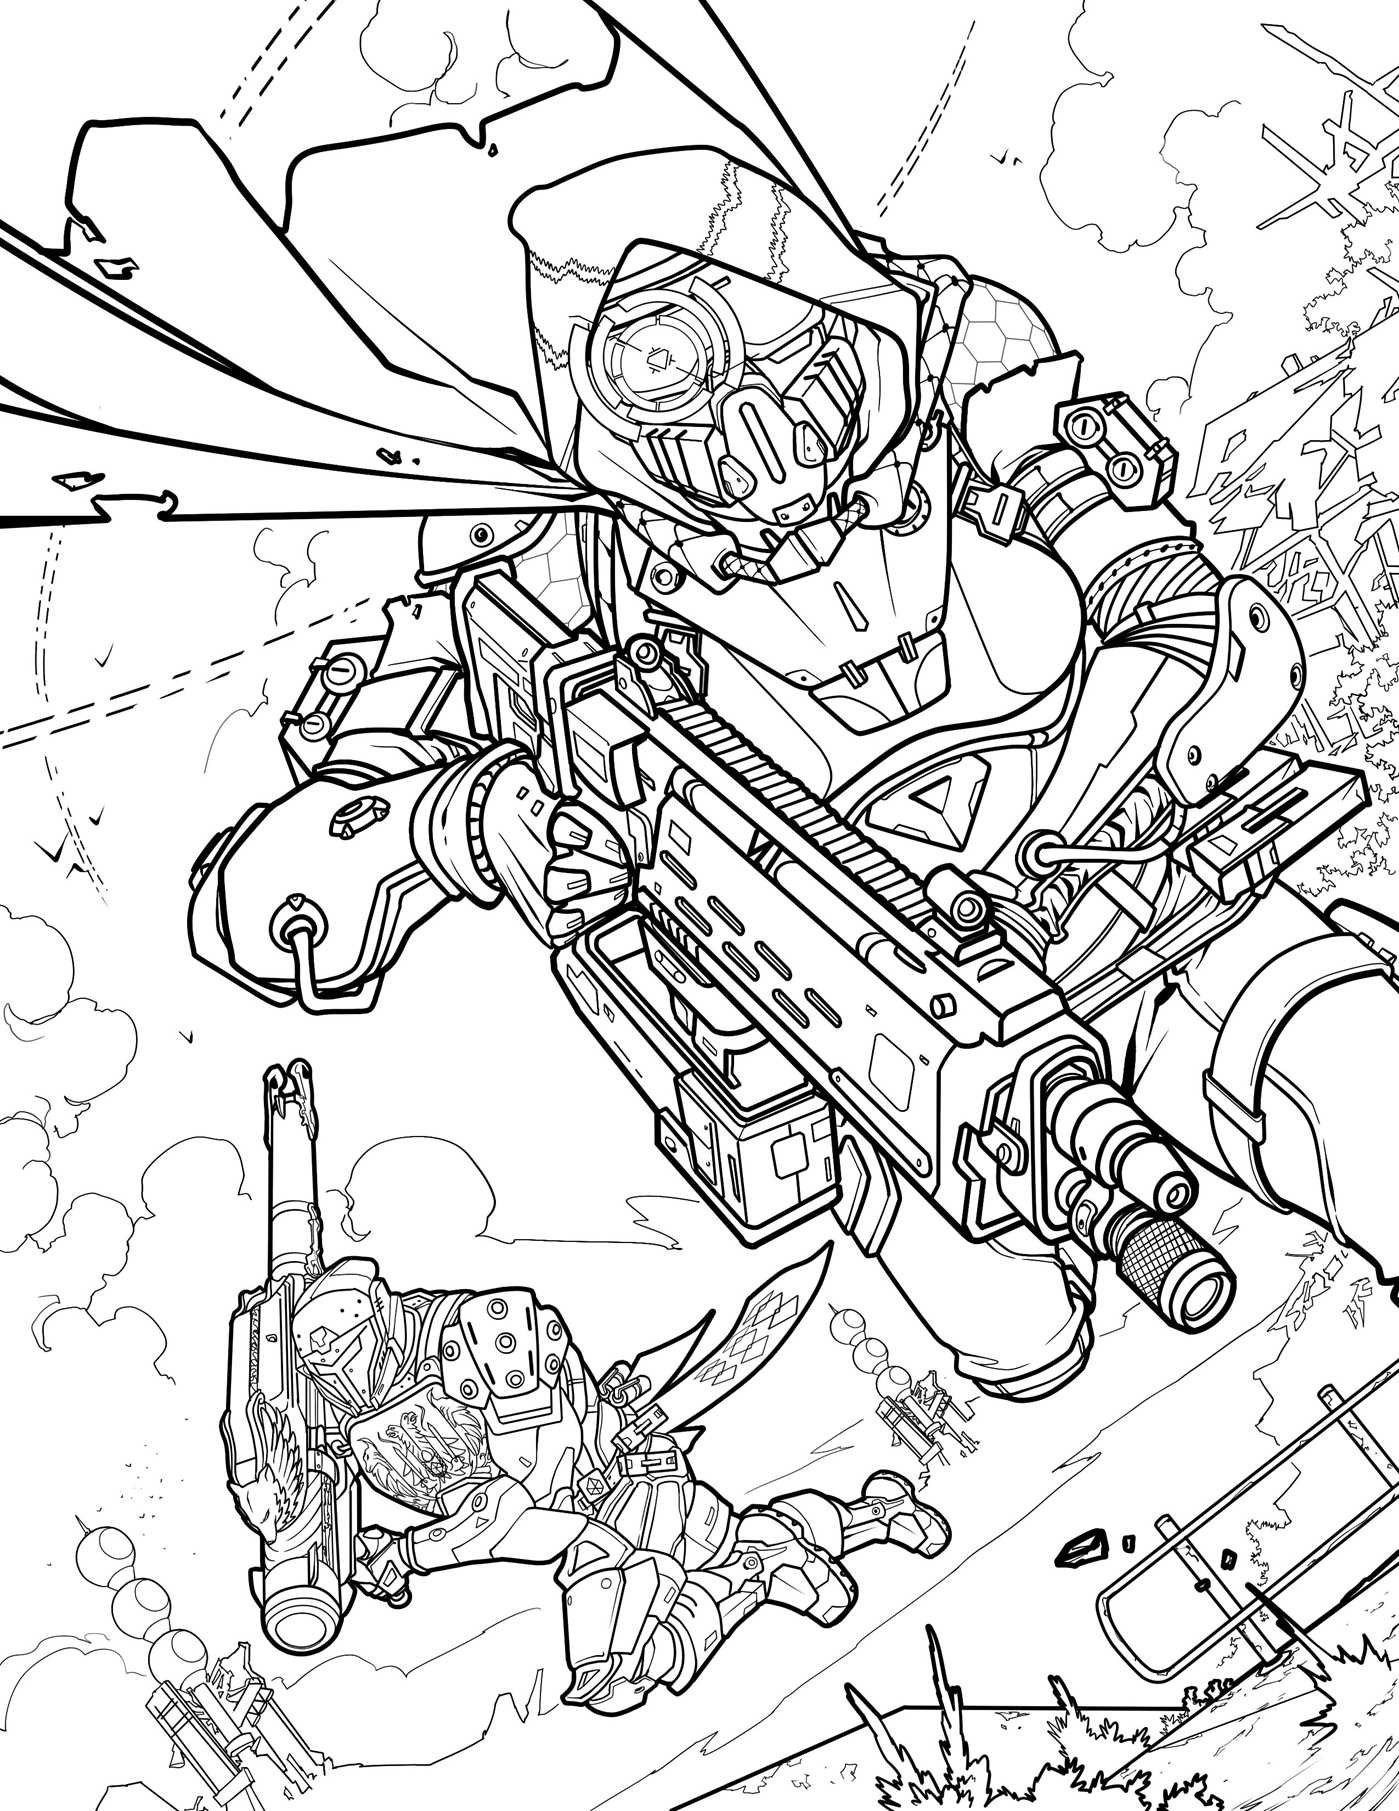 Destiny coloring page | Coloring books